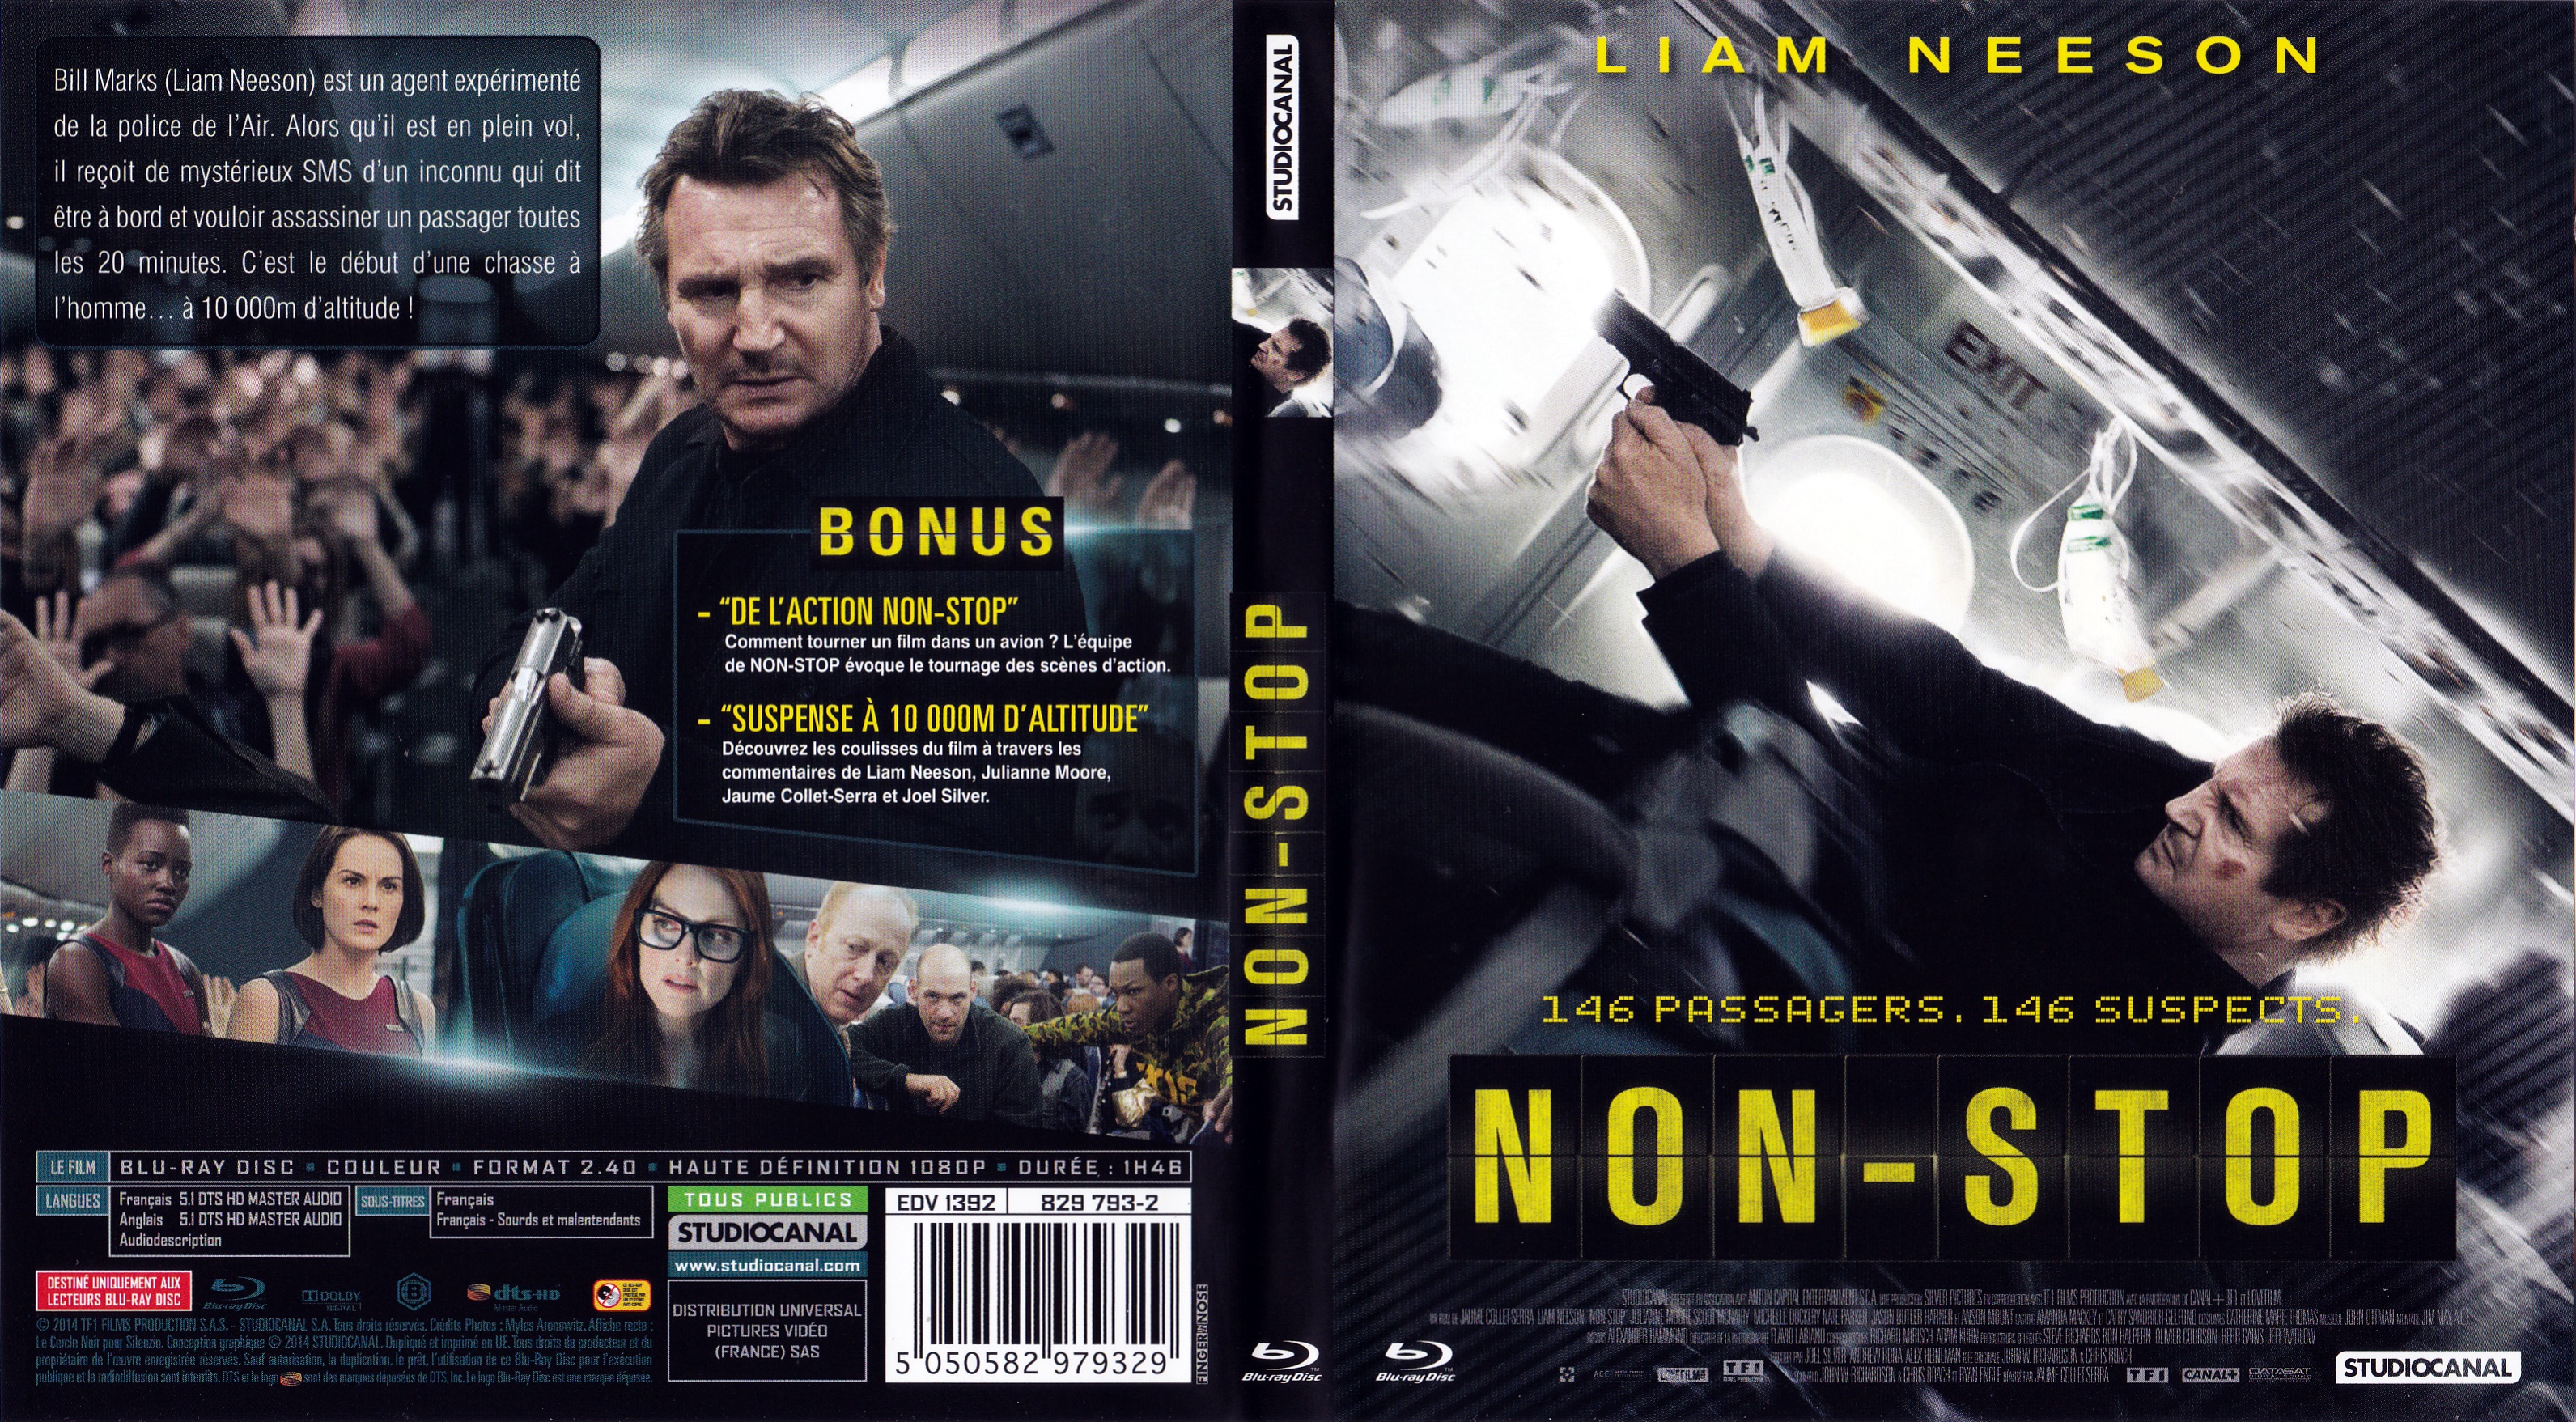 Jaquette DVD Non-stop (BLU-RAY)